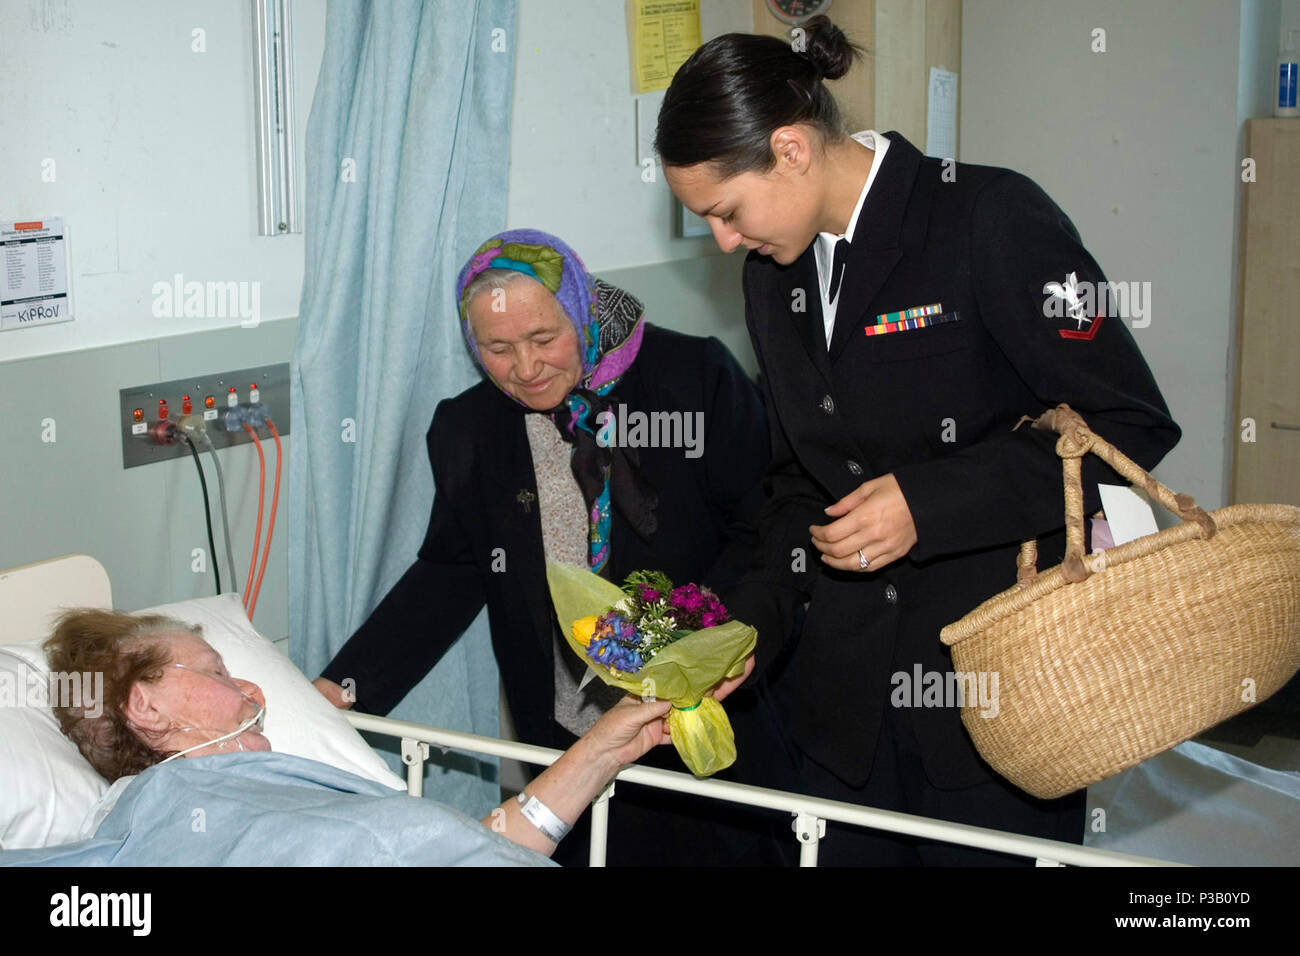 Australia (Sept. 2, 2008) Cryptologic Technician (Collections) 3rd Class Brittany Gonzales, from Corpus Christi, Texas, delivers a posy bunch to a Royal Melbourne Hospital patient during a community outreach project conducted by Sailors from the guided-missile destroyer USS John S. McCain (DDG 56). The ship's port visit to Melbourne is part of the Great White Fleet centennial anniversary celebration. U.S. Navy Stock Photo